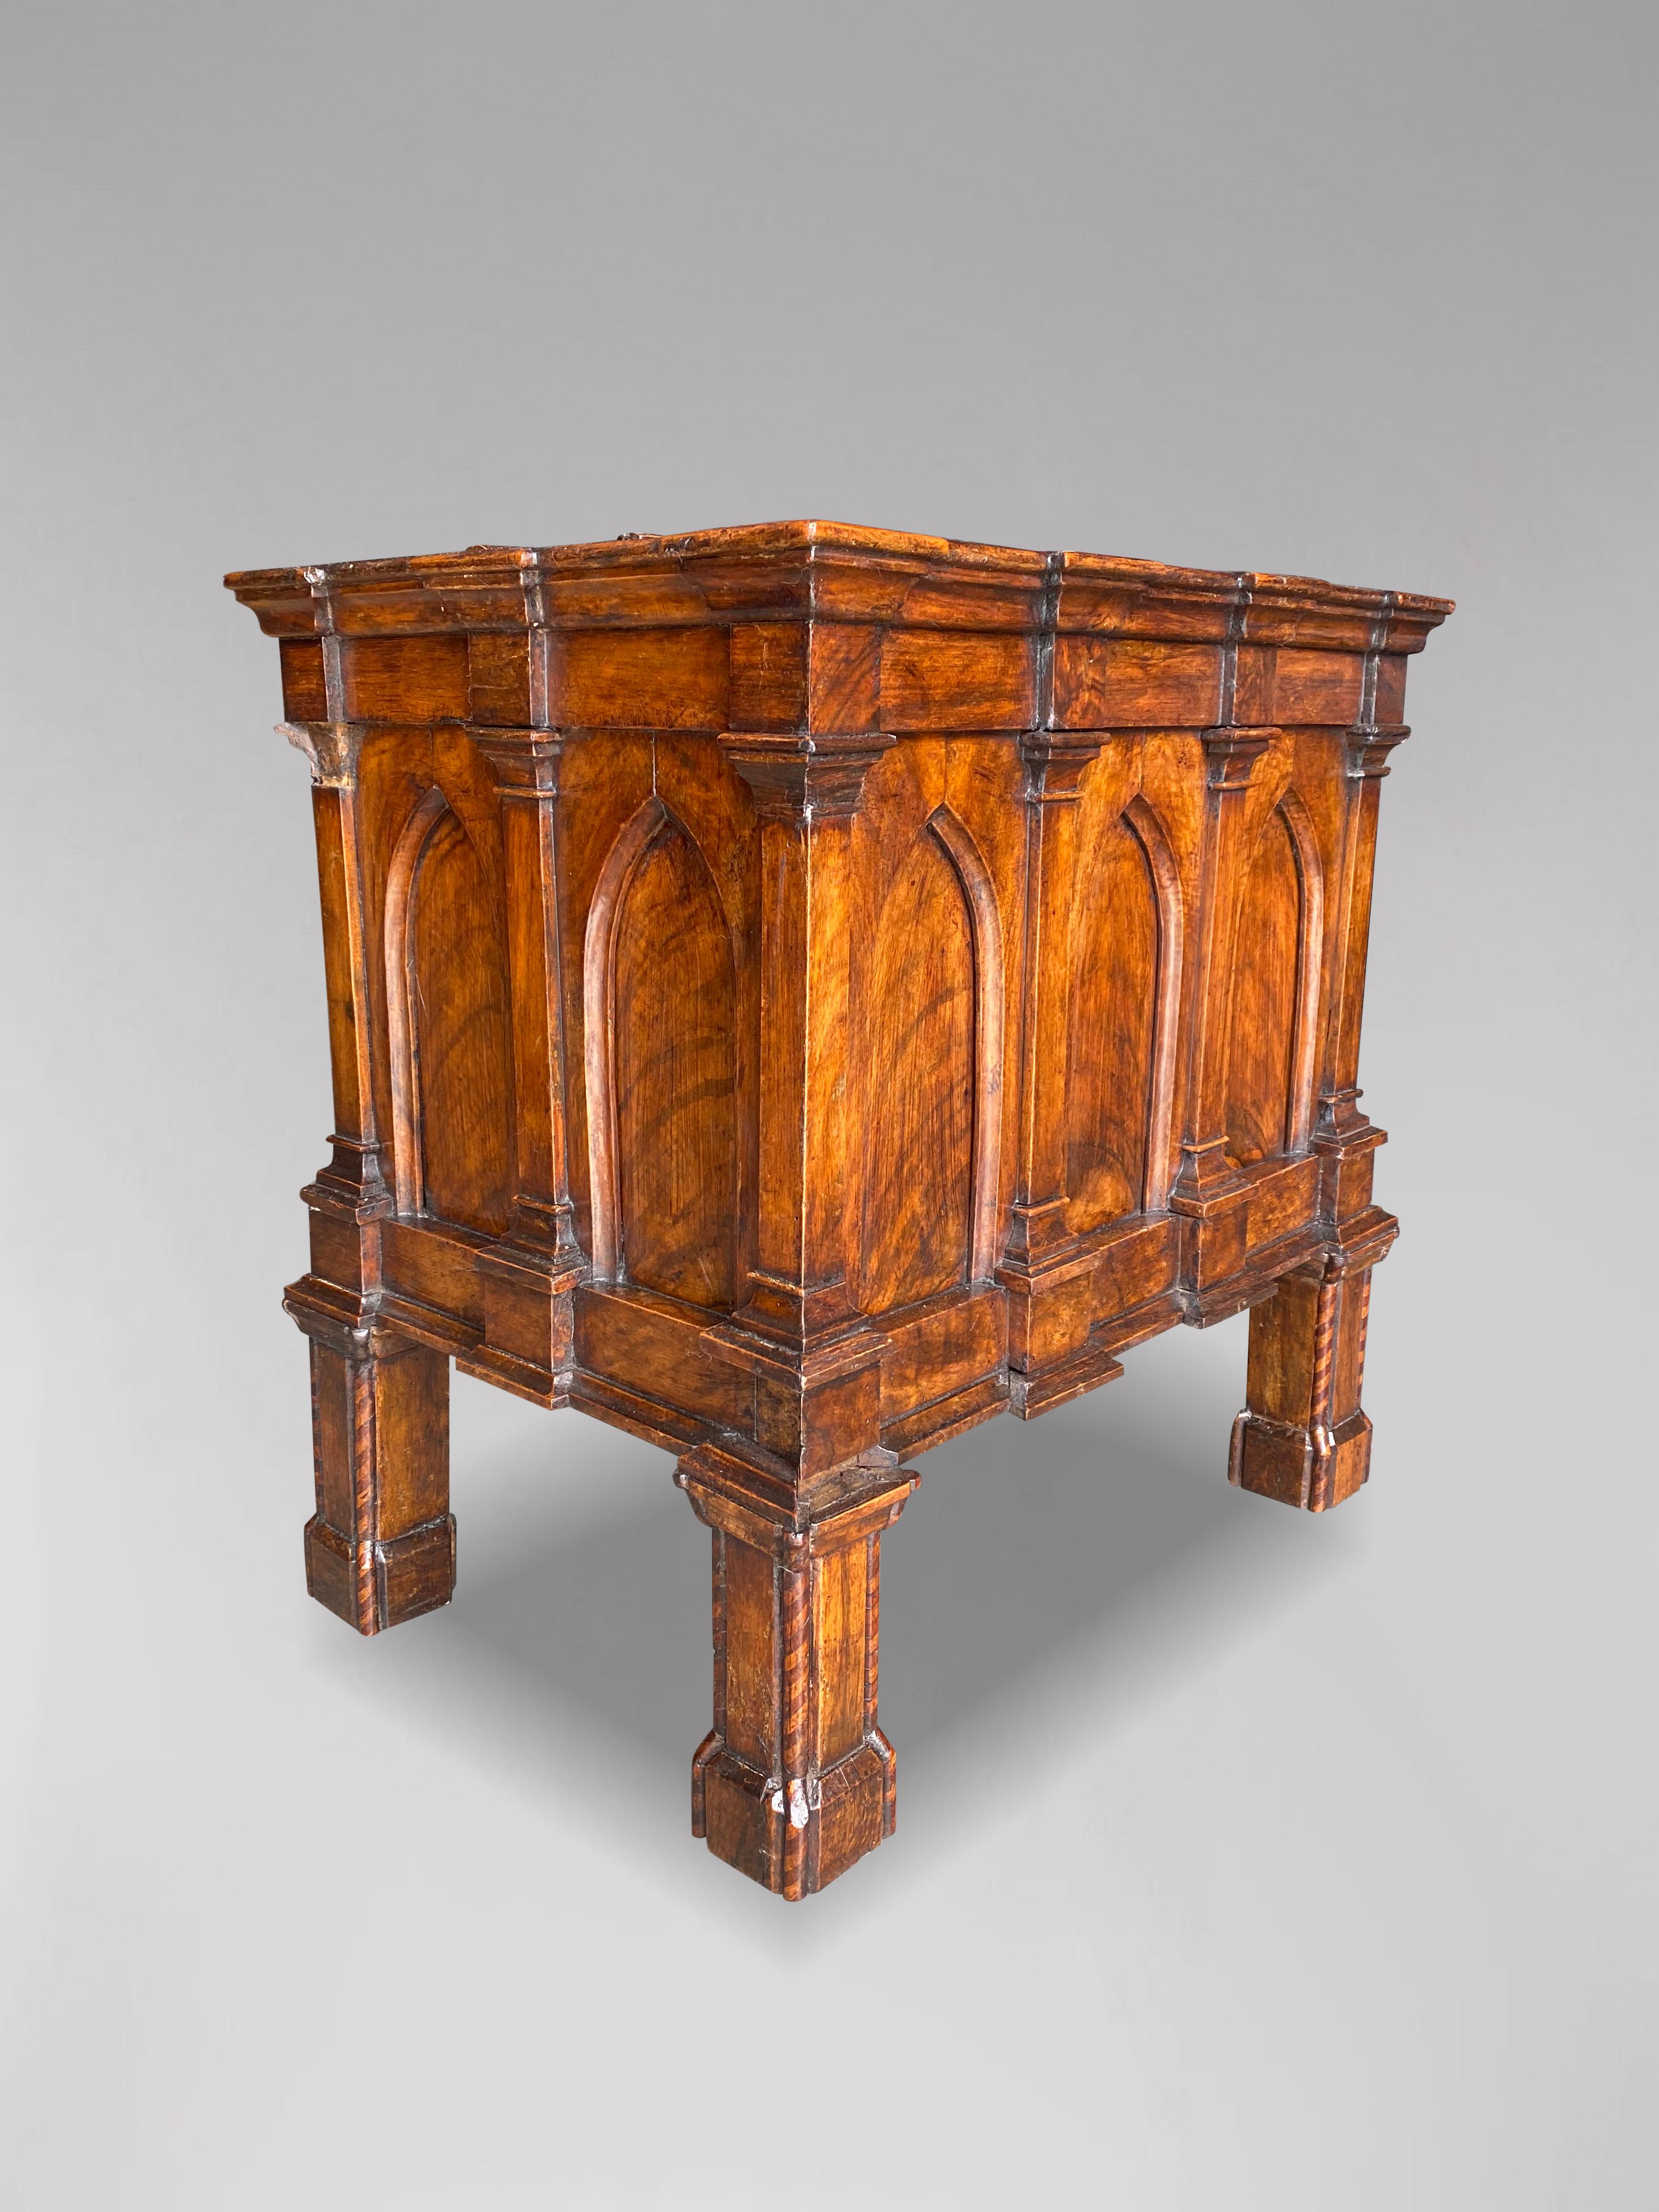 19th Century French Gothic Canterbury in Walnut In Good Condition For Sale In Petworth,West Sussex, GB